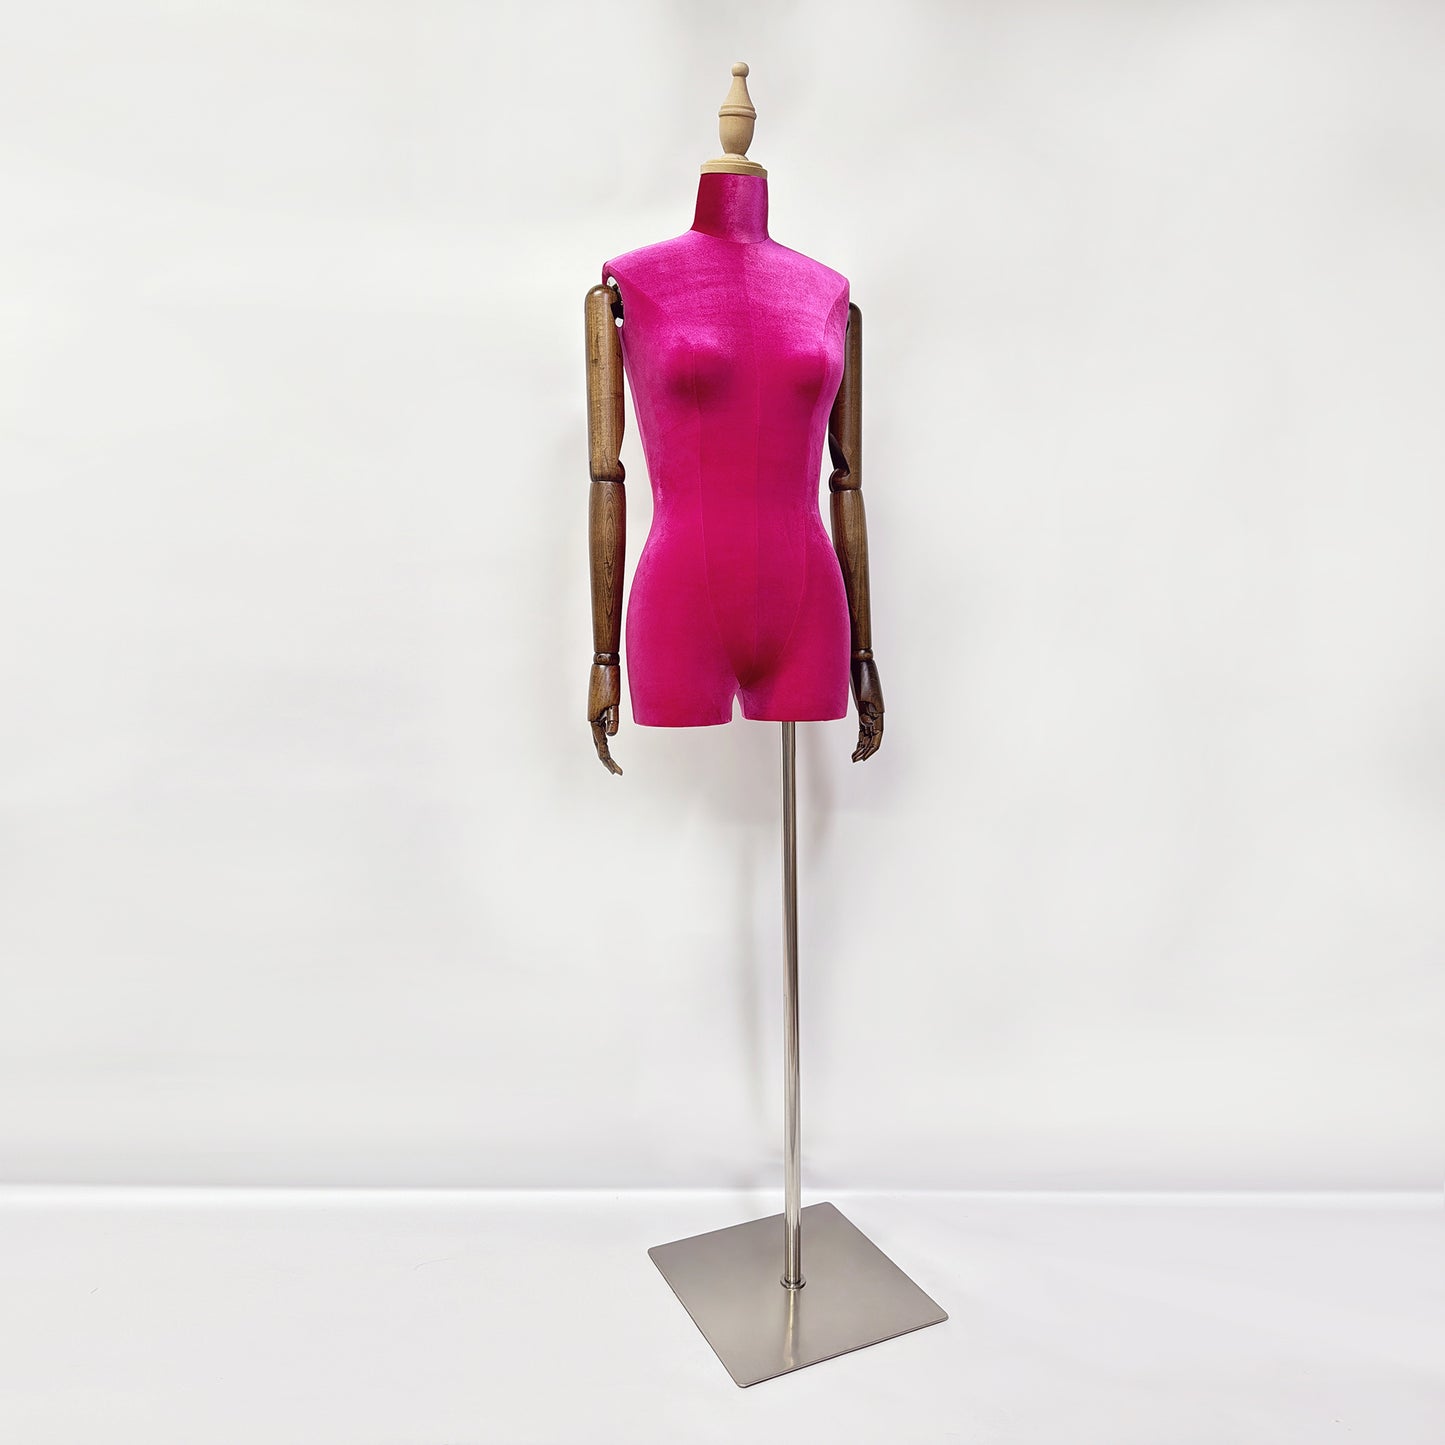 DE-LIANG female mannequin, plus size 10 and size 12 dress form for window display, customize velvet display model with wooden arms dummy